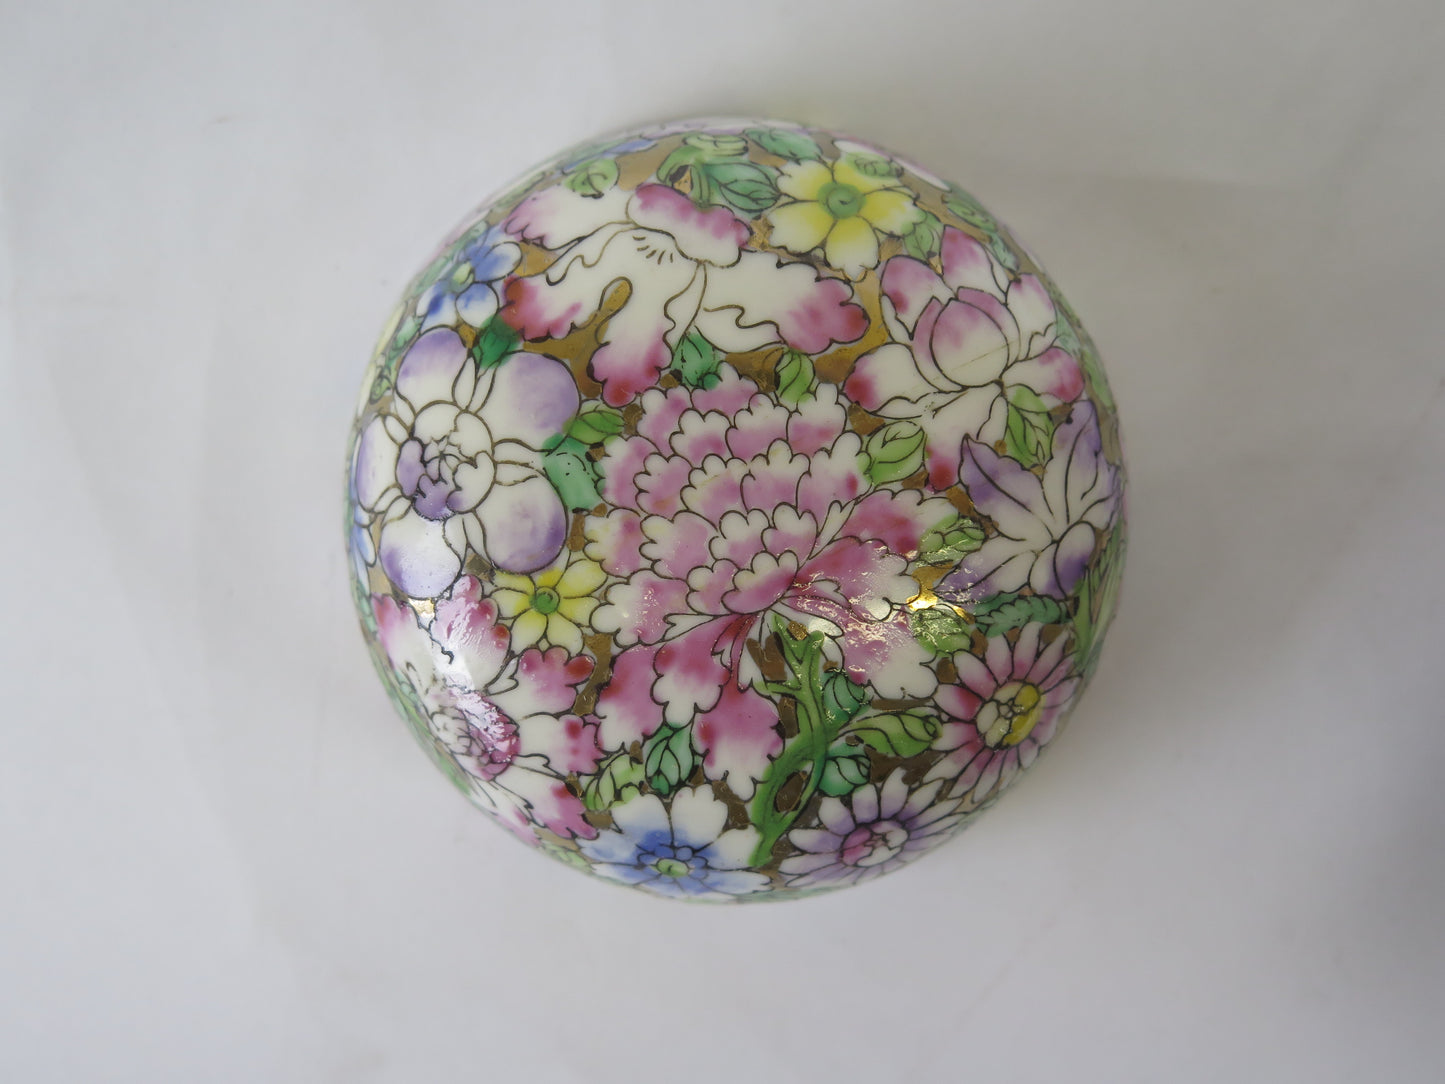 Vintage Chinese hand-painted ceramic vase with floral motifs urn vase with lid decorated with flowers CM8